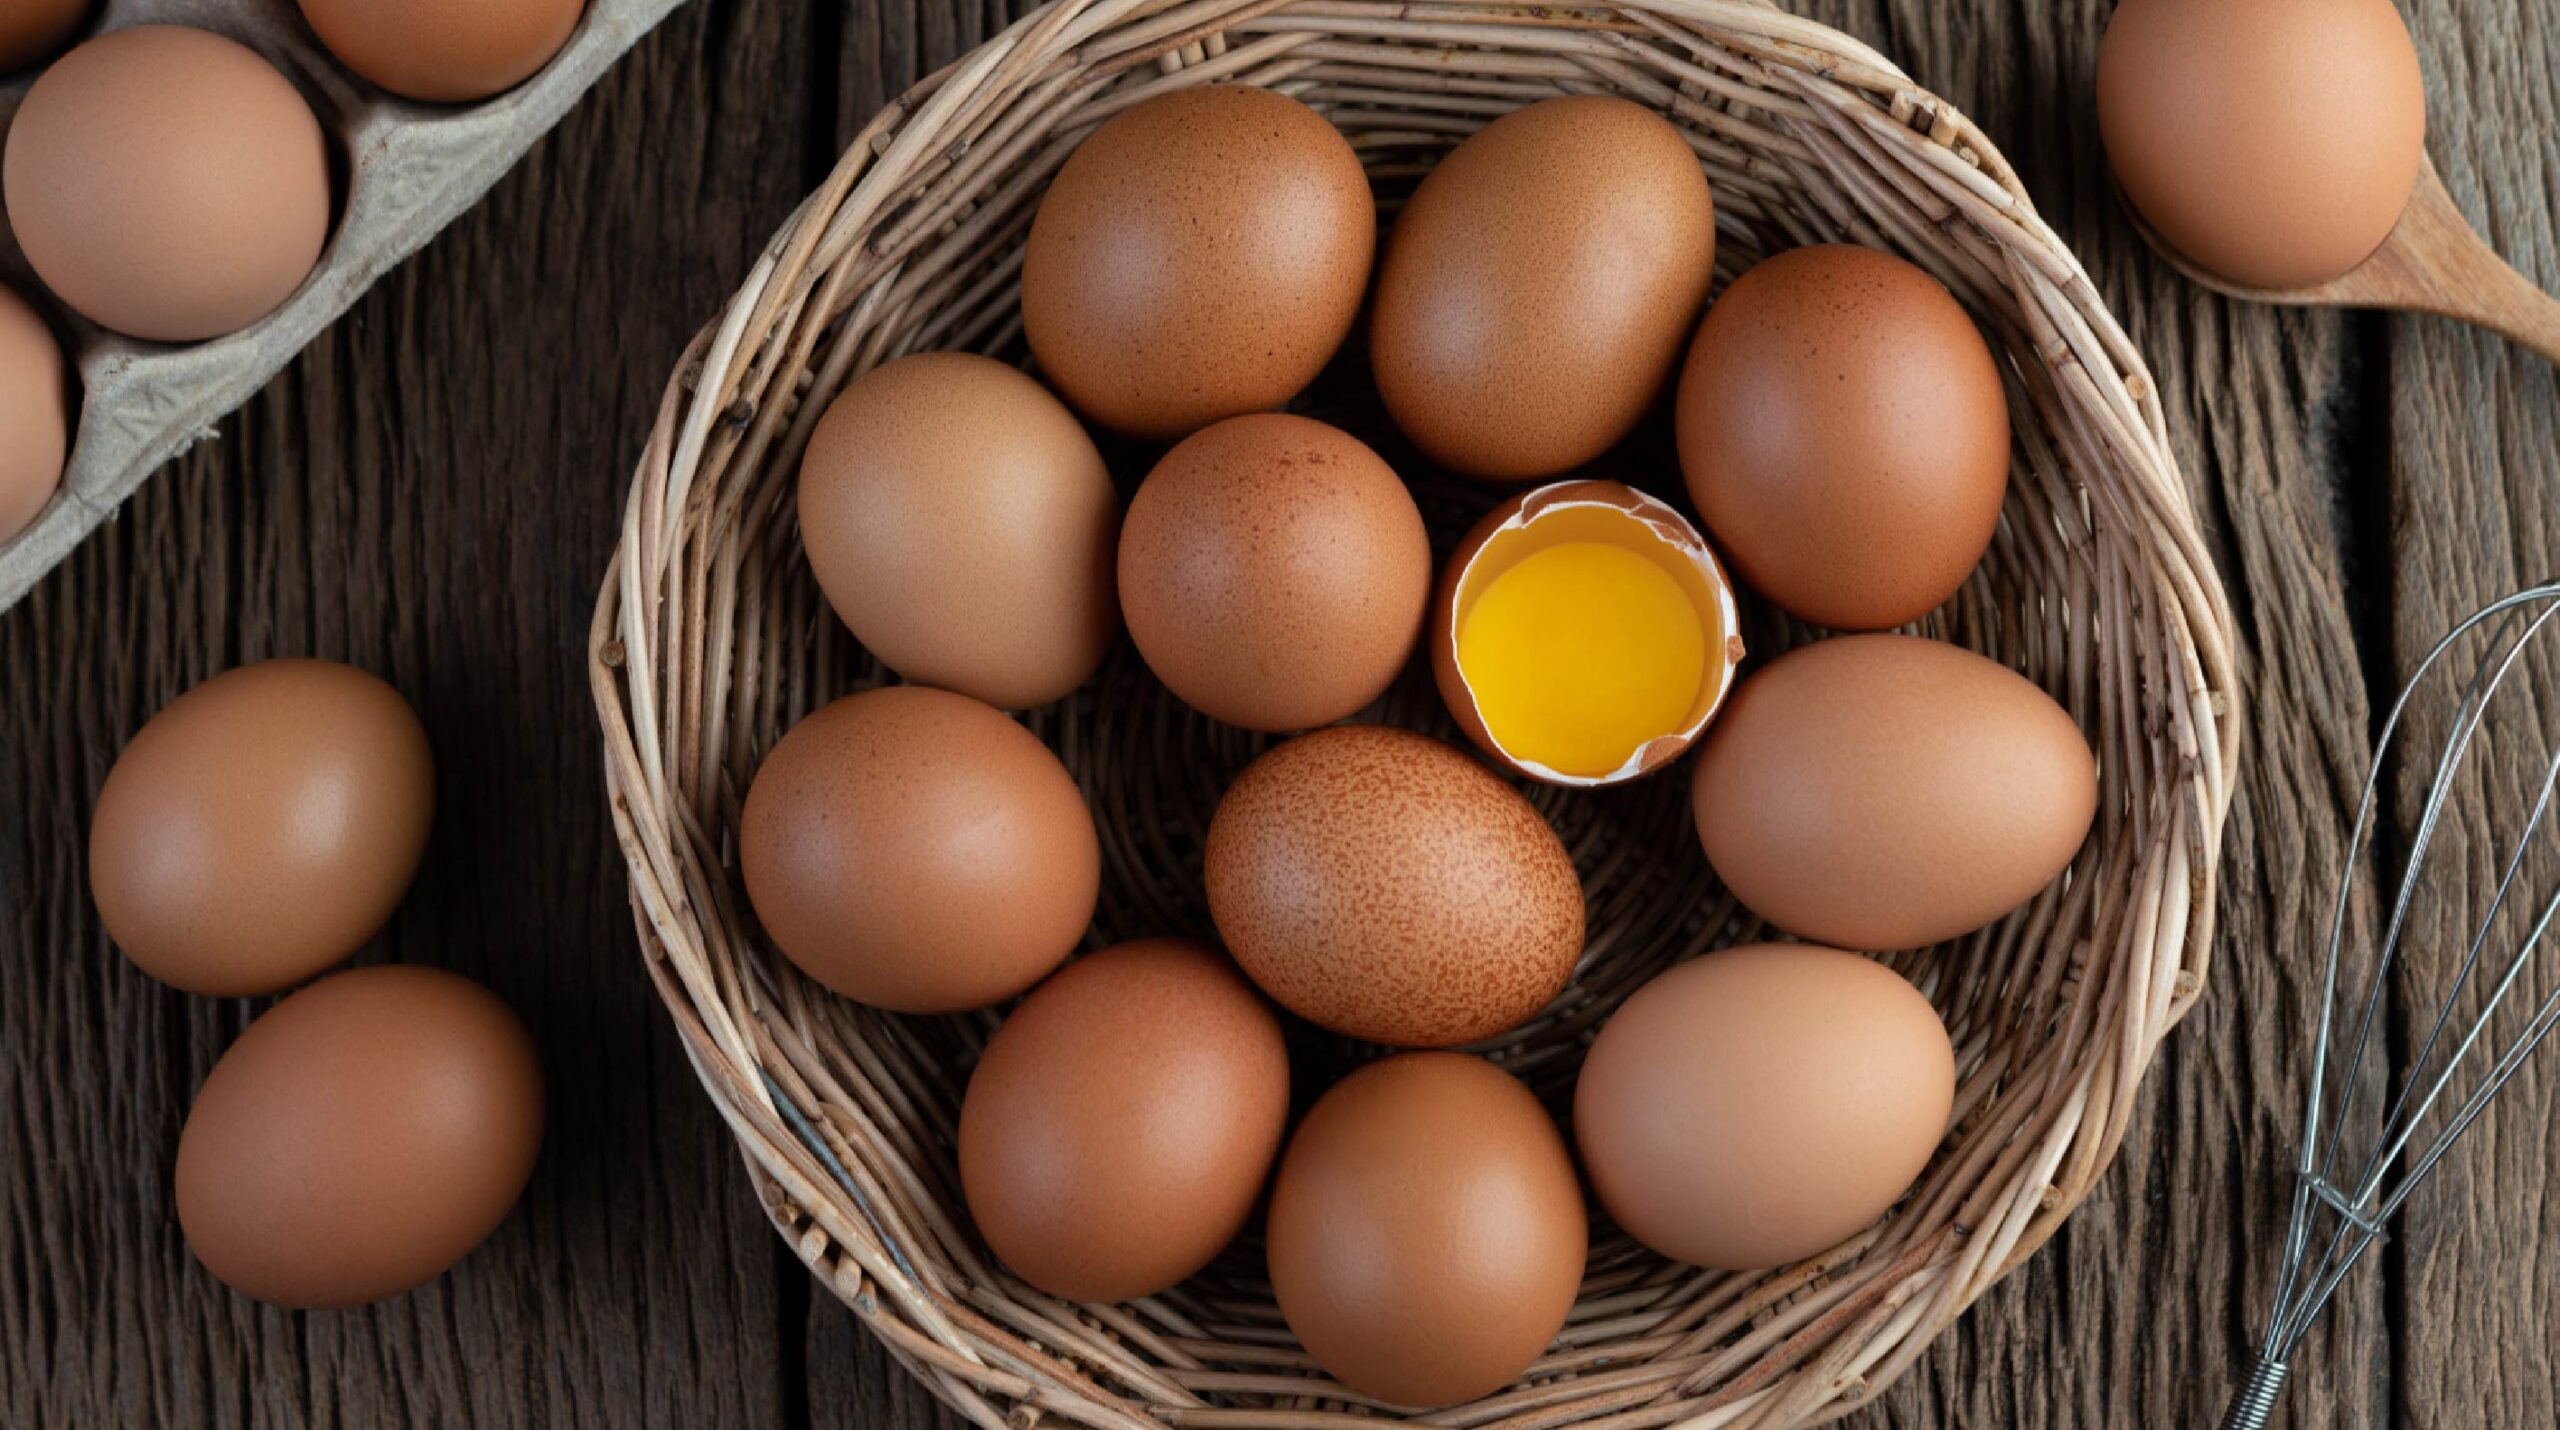 Myths and Facts about Eggs